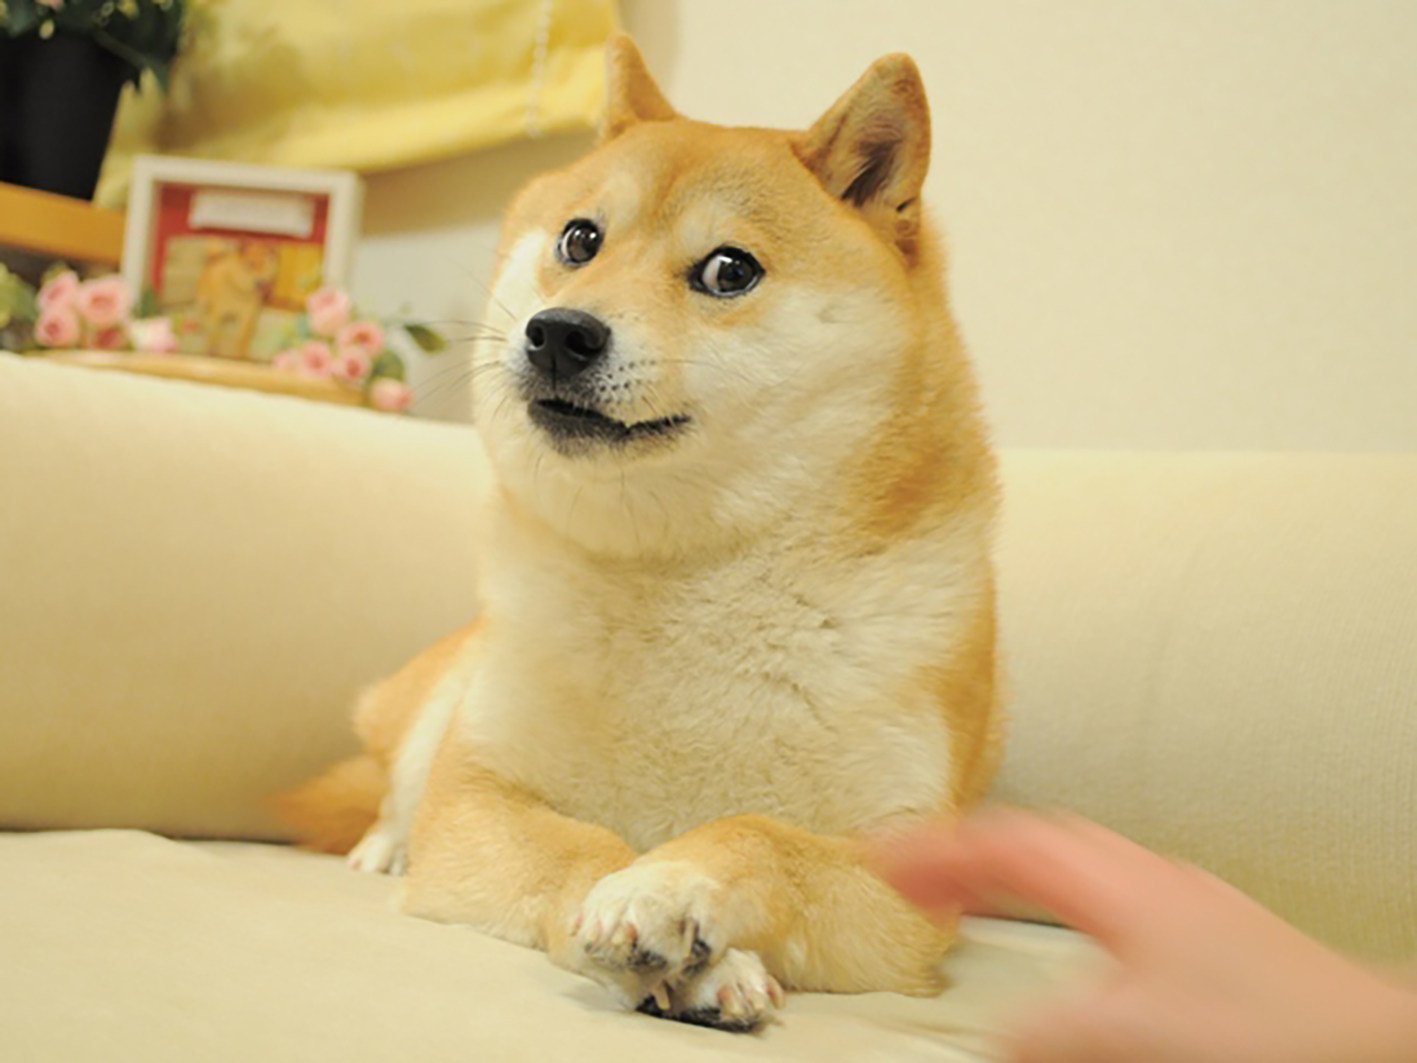 The photo of shiba inu Kabosu posted online in 2010 by Atsuko Sato, who adopted her as a rescue puppy. It spawned online memes, one of which led to the creation of the cryptocurrency Dogecoin, and was turned into an NFT. Photo: Handout